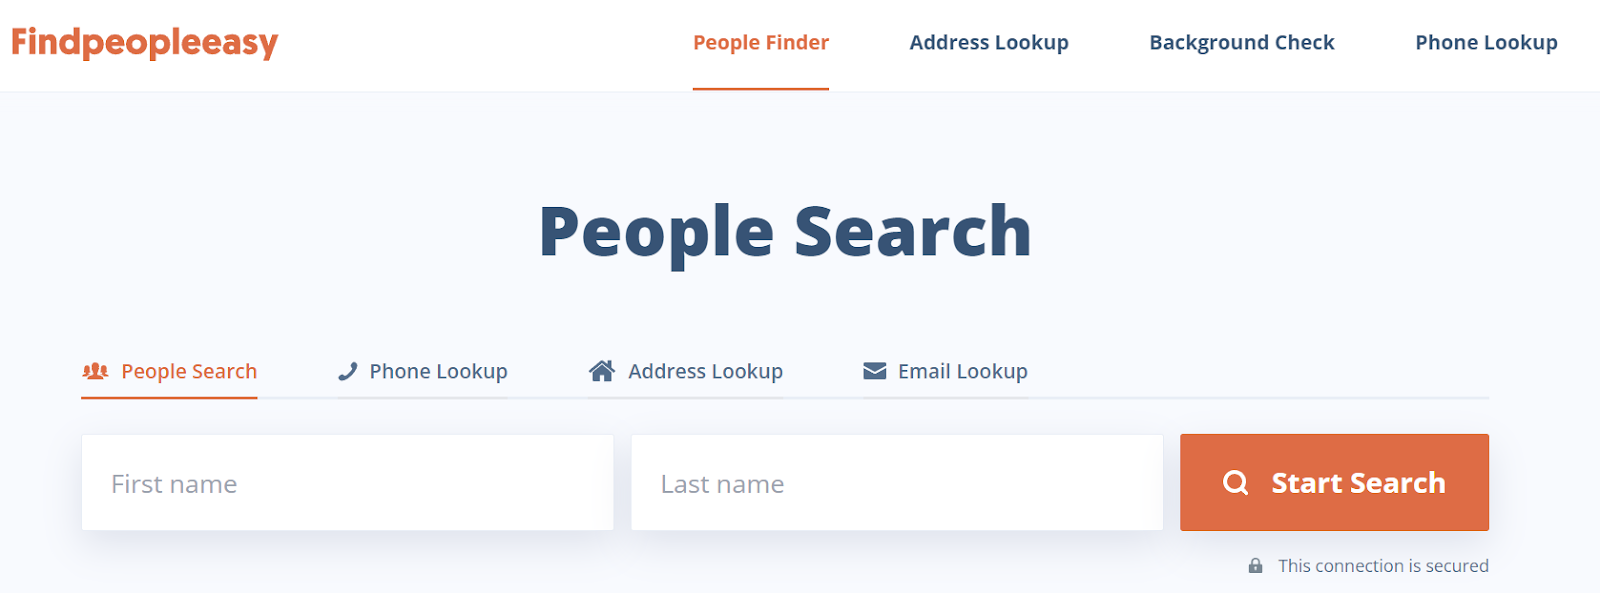 Find people easily 